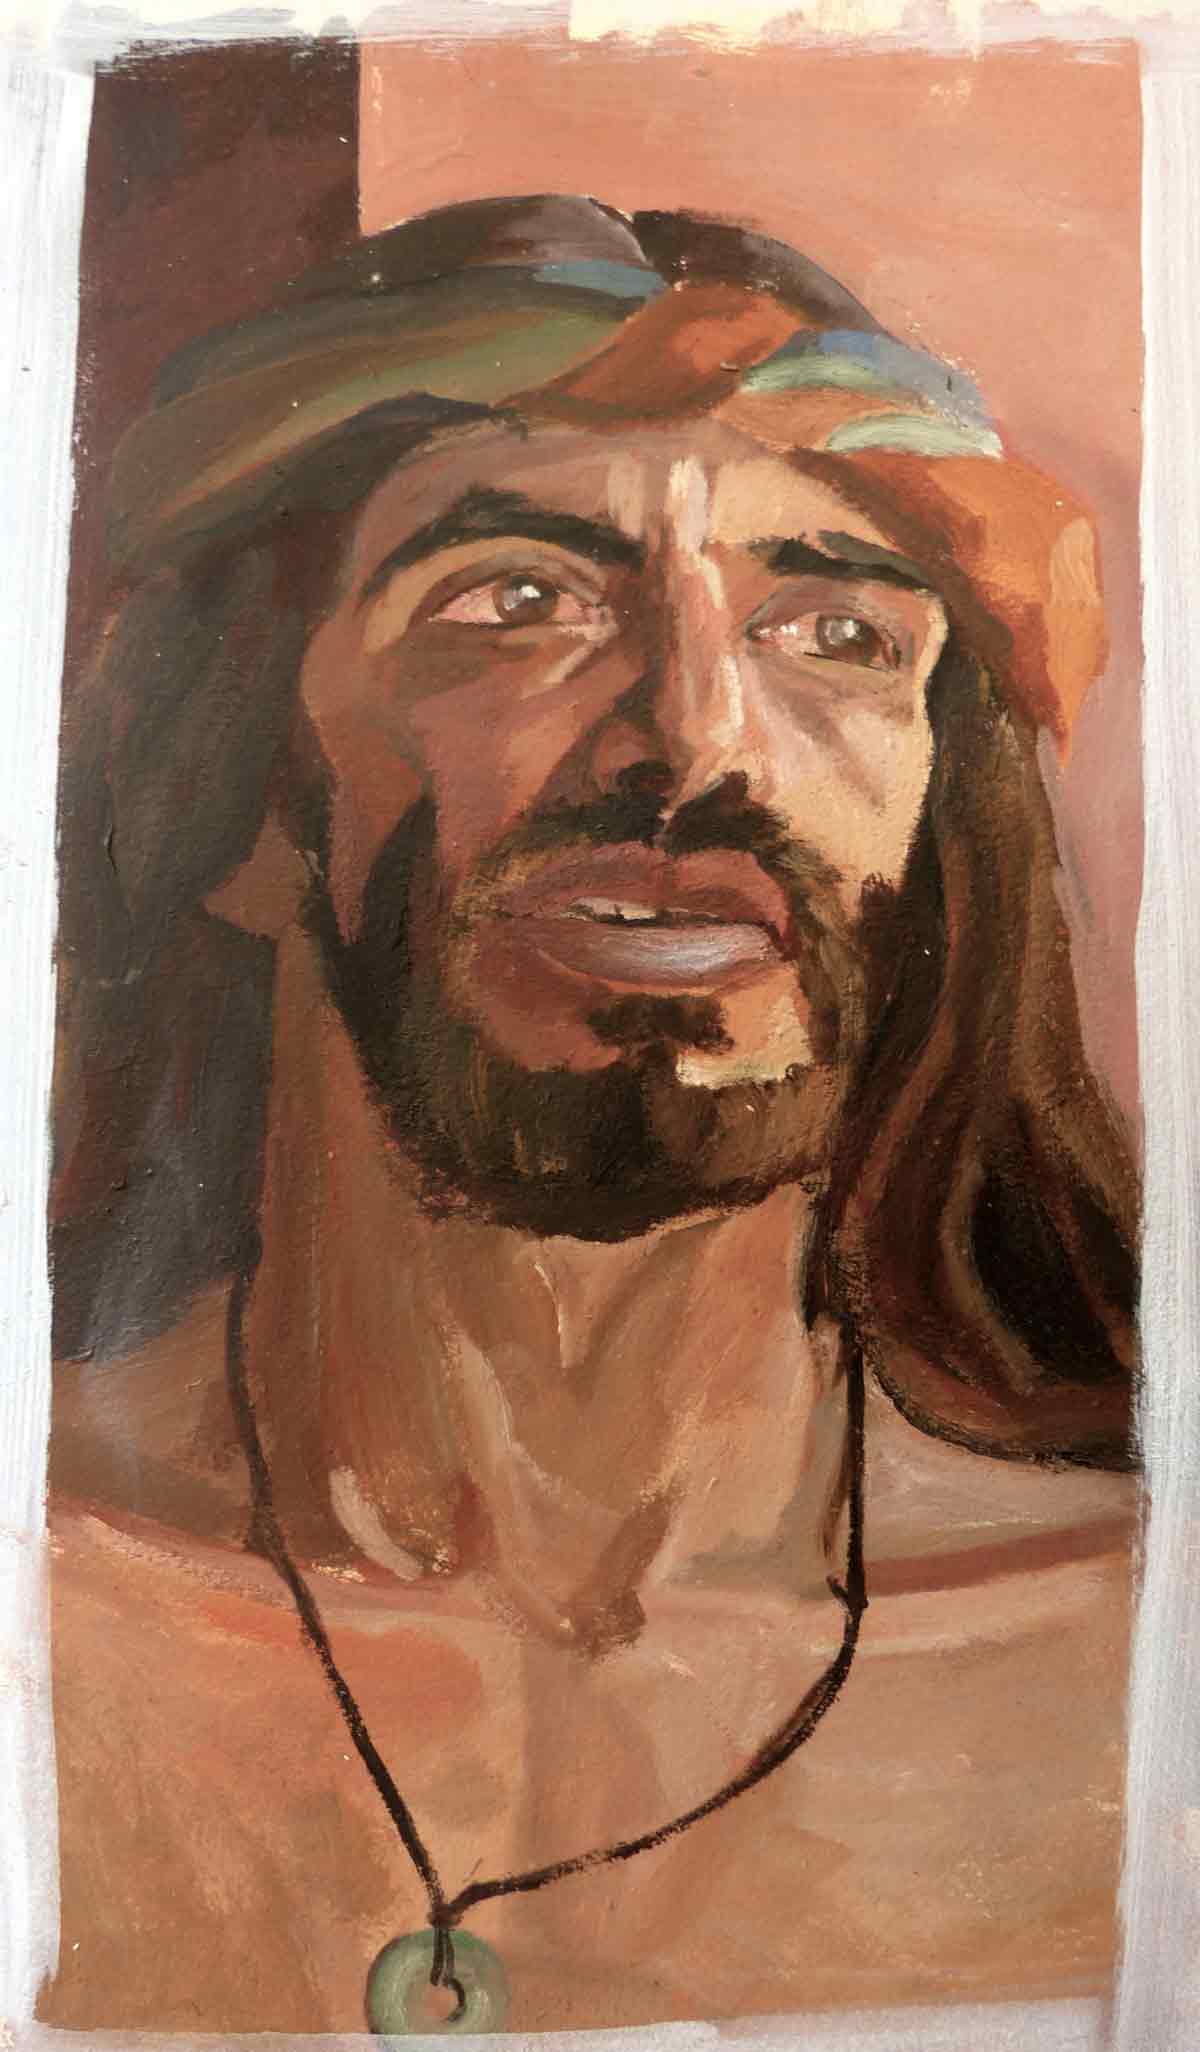 Sketch of a man in Goa, india by Victoria Orr Ewing